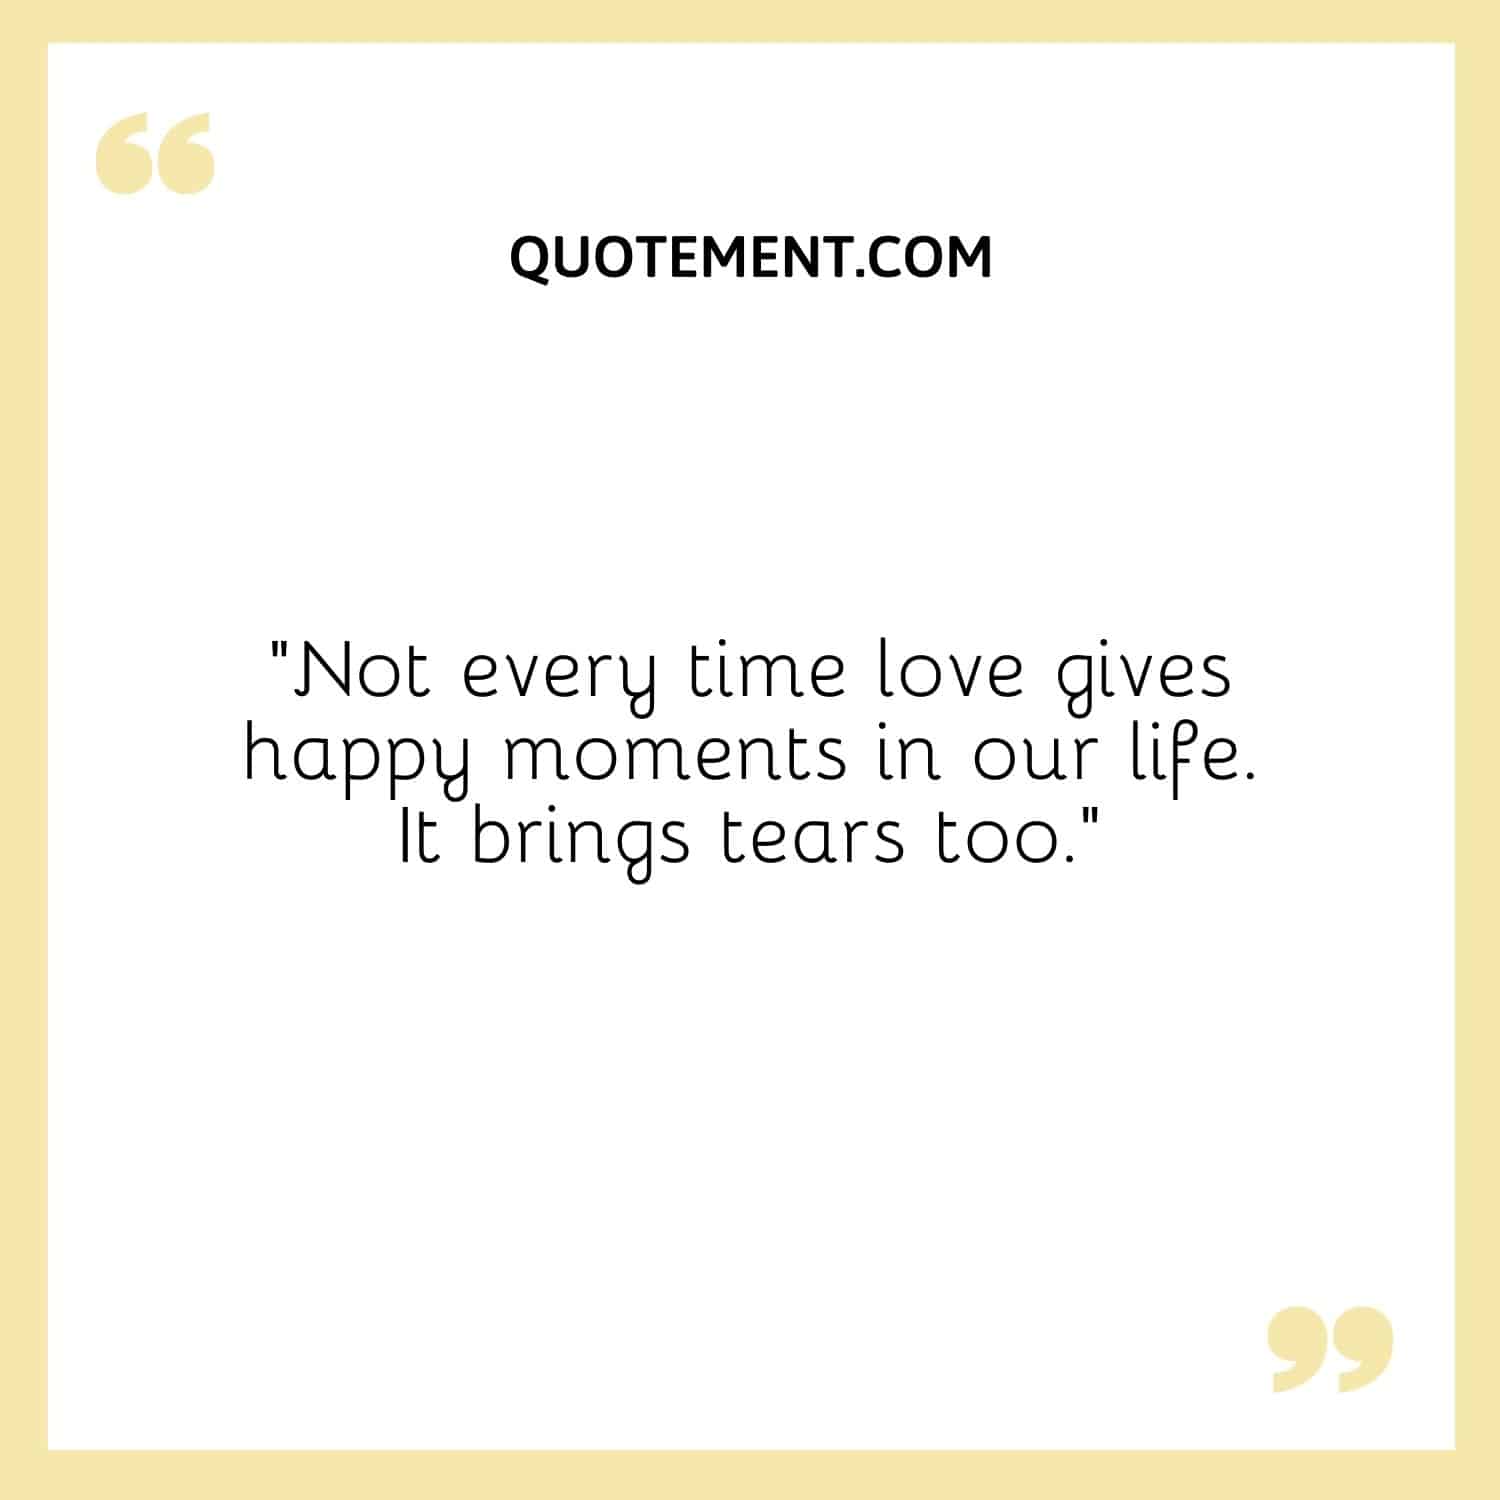 Not every time love gives happy moments in our life